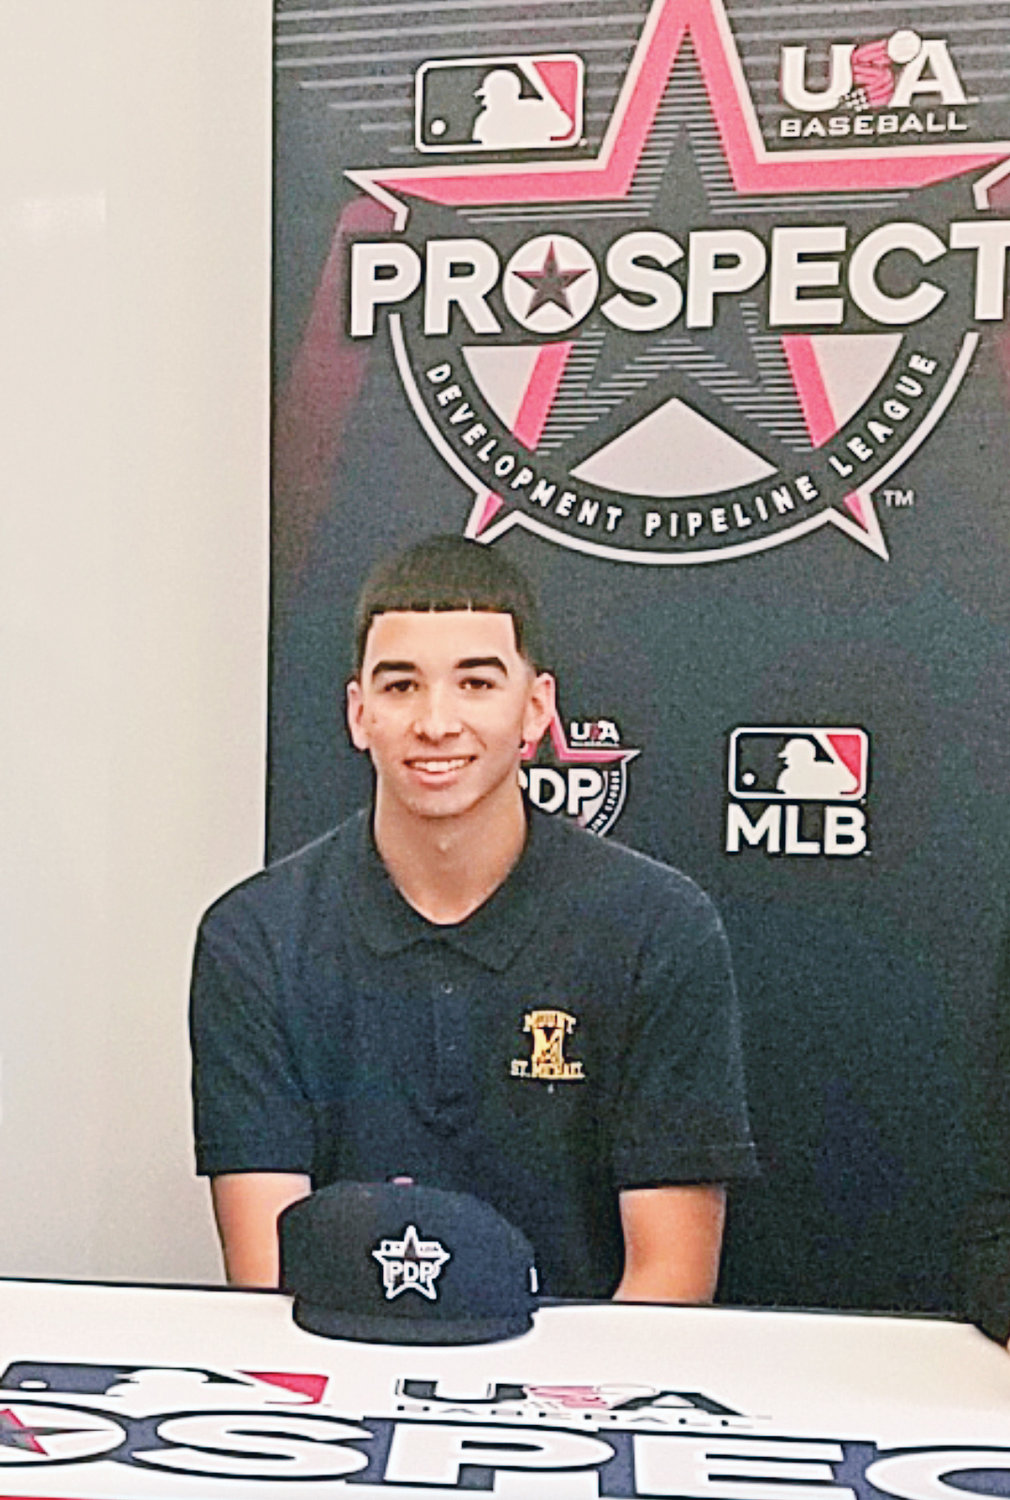 OFF TO PROS—Mount St. Michael Academy graduate Alex Santos was selected by the Houston Astros with their first pick in the 2020 Major League Baseball Draft June 11. In this photo, Santos celebrates his selection to the inaugural Prospect Development Pipeline League with family, friends and coaches at Mount St. Michael in 2019.